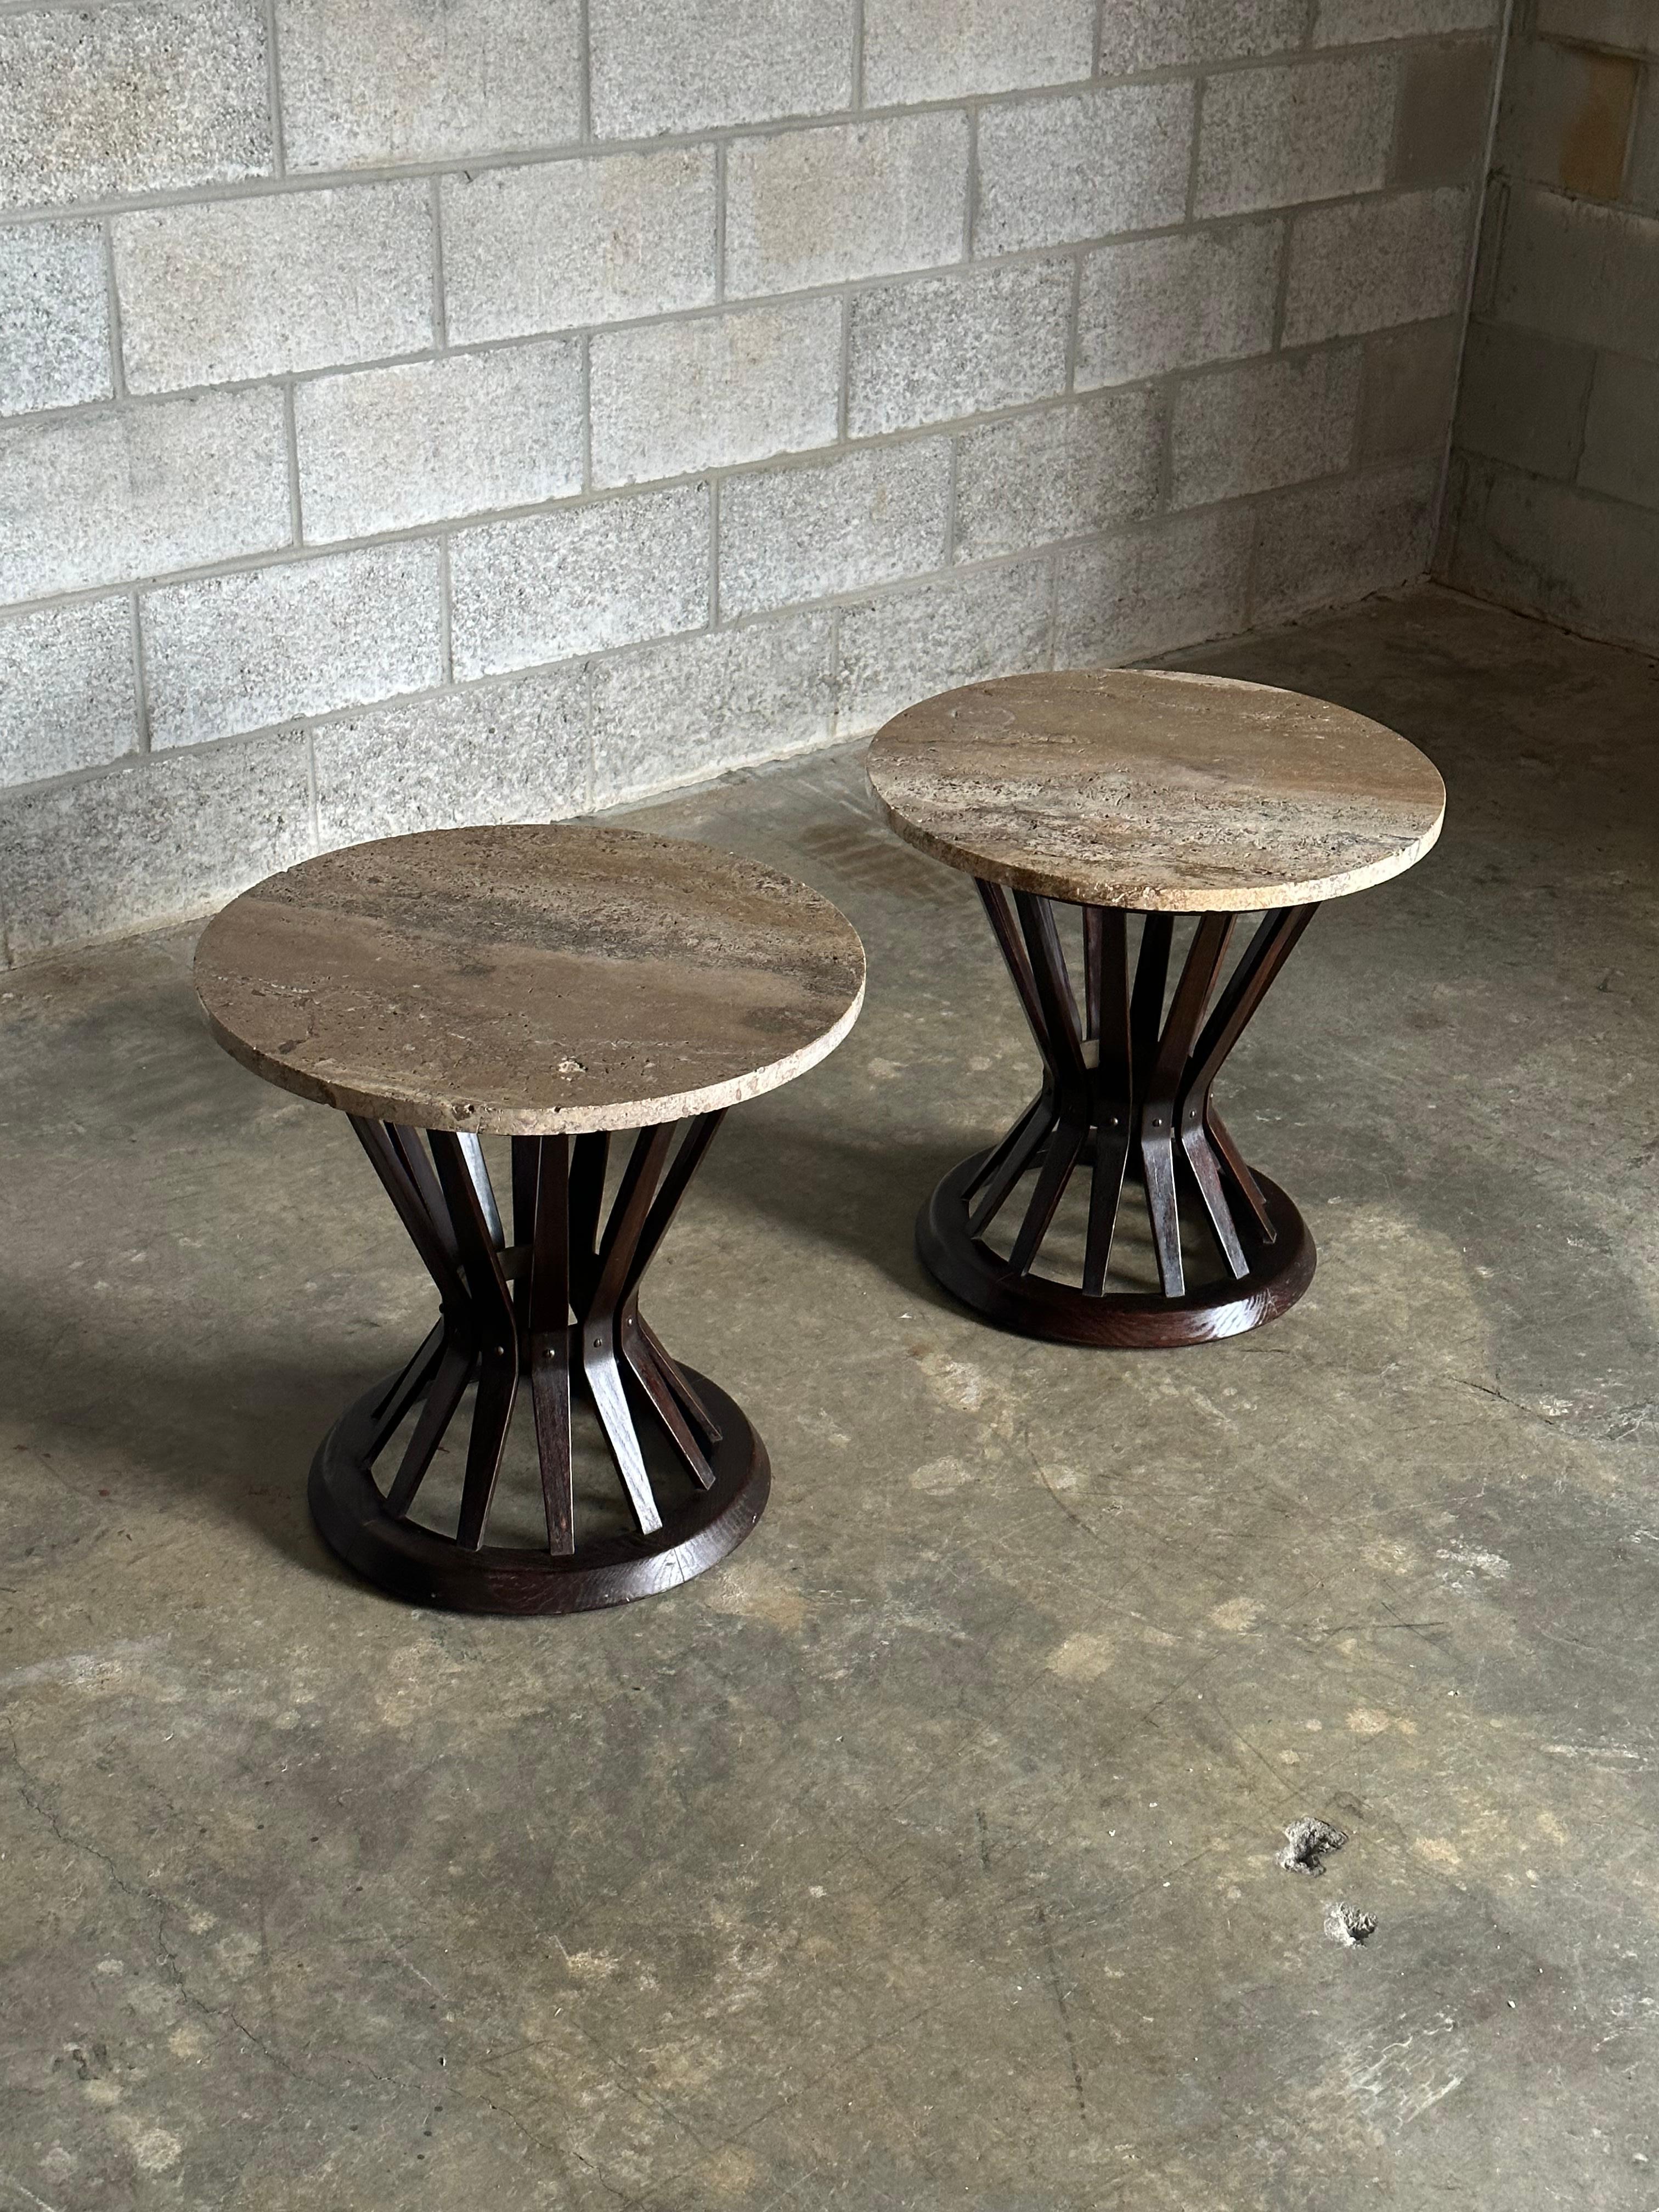 A rare pair of matching Edward Wormley Sheaf of Wheat Tables. Composed of an ash body with brass ring, they are complete with travertine tops. A timeless design with exciting use of materials, these tables could blend into basically any interior